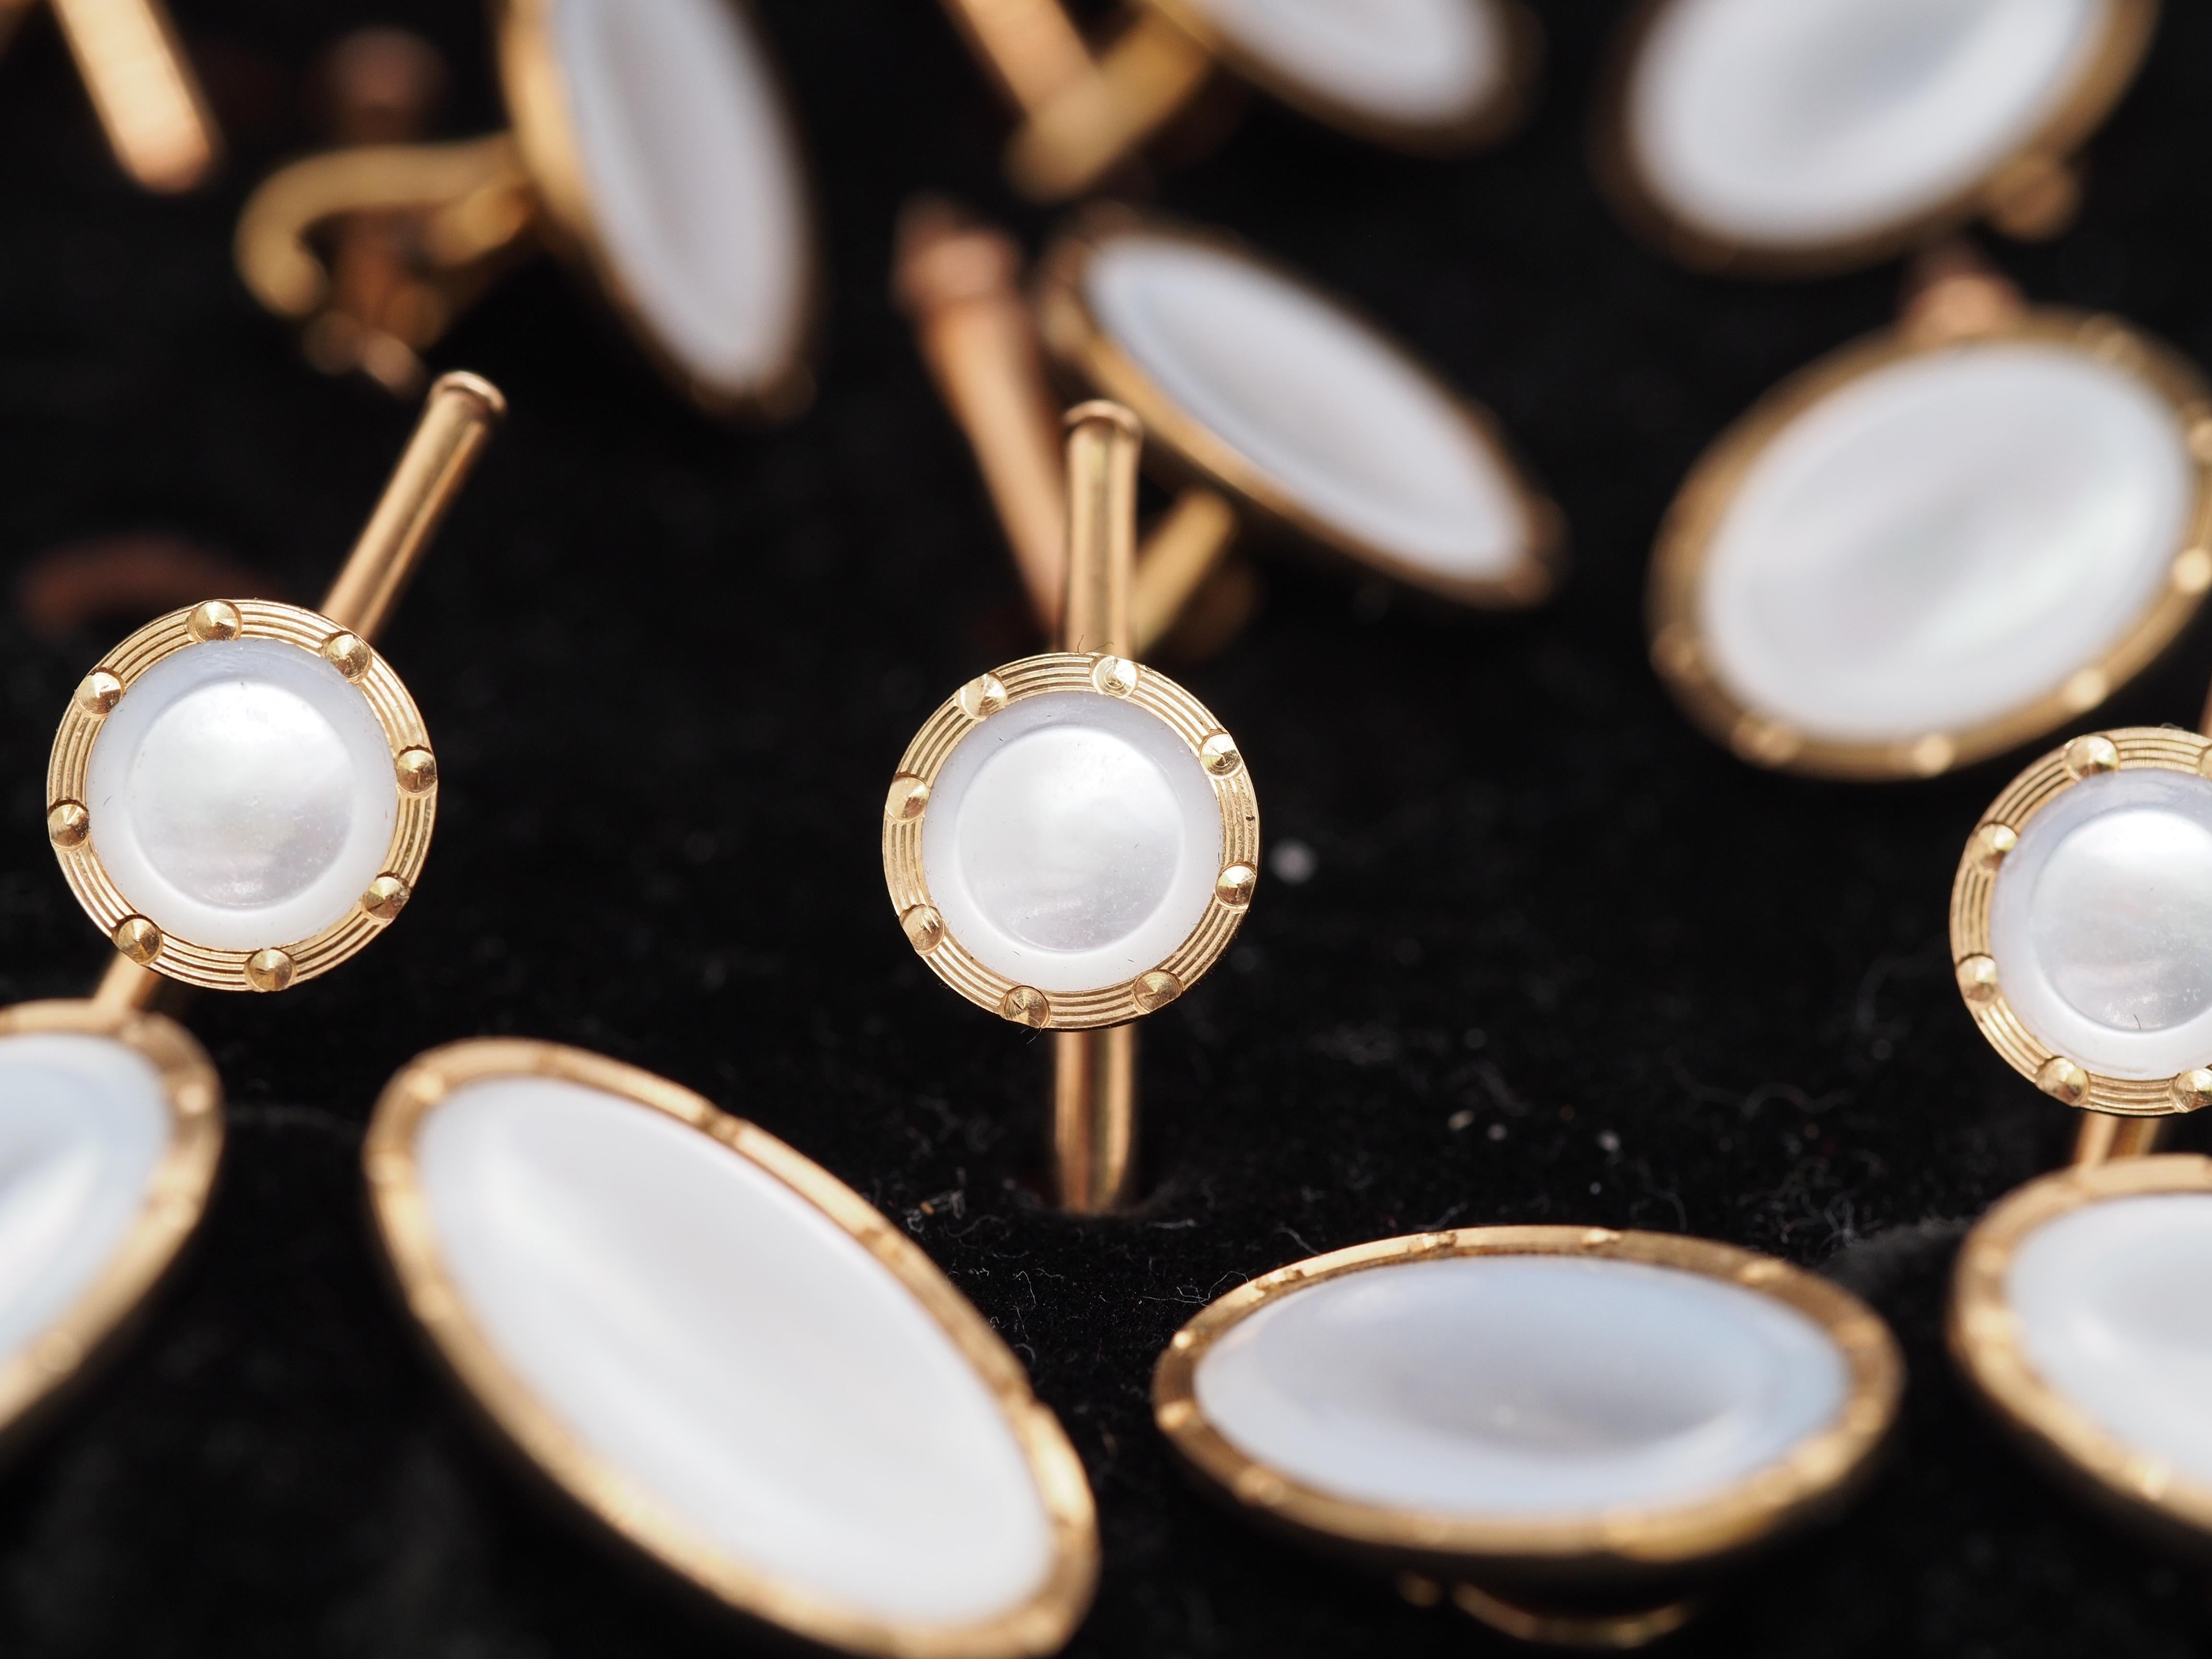 Art Deco Circa 1920s 14K Yellow Gold Mother of Pearl Cufflink and Tuxedo Set For Sale